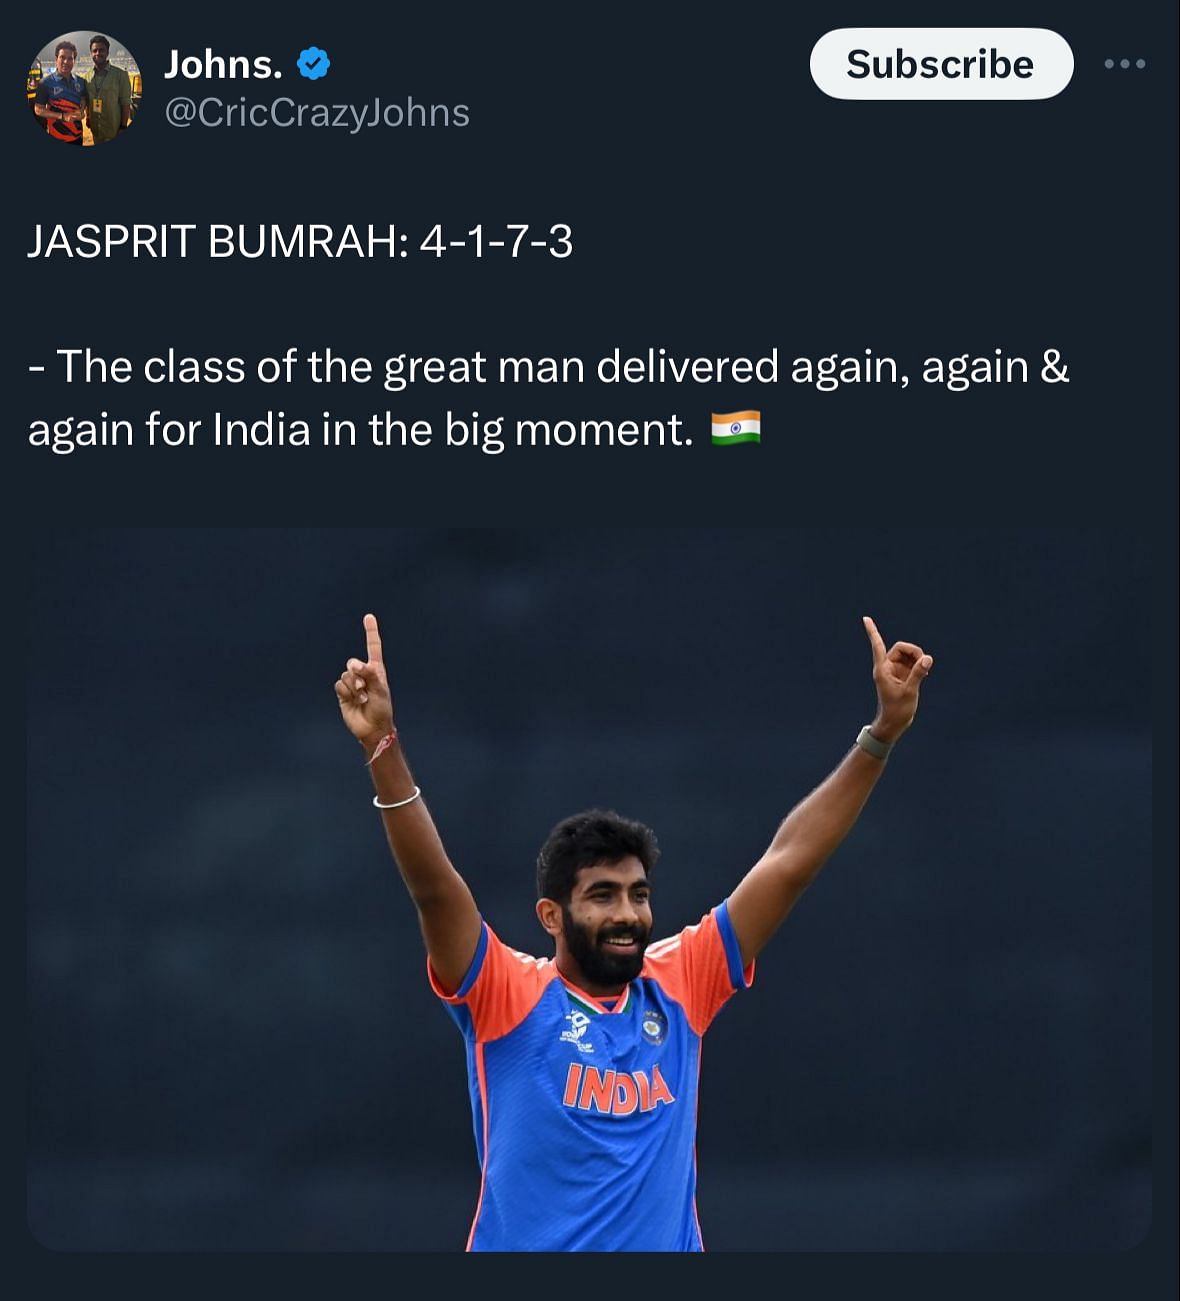 Bumrah delivered exceptional figures against Afghanistan - 1 maiden, 7 runs conceded, and 3 wickets.